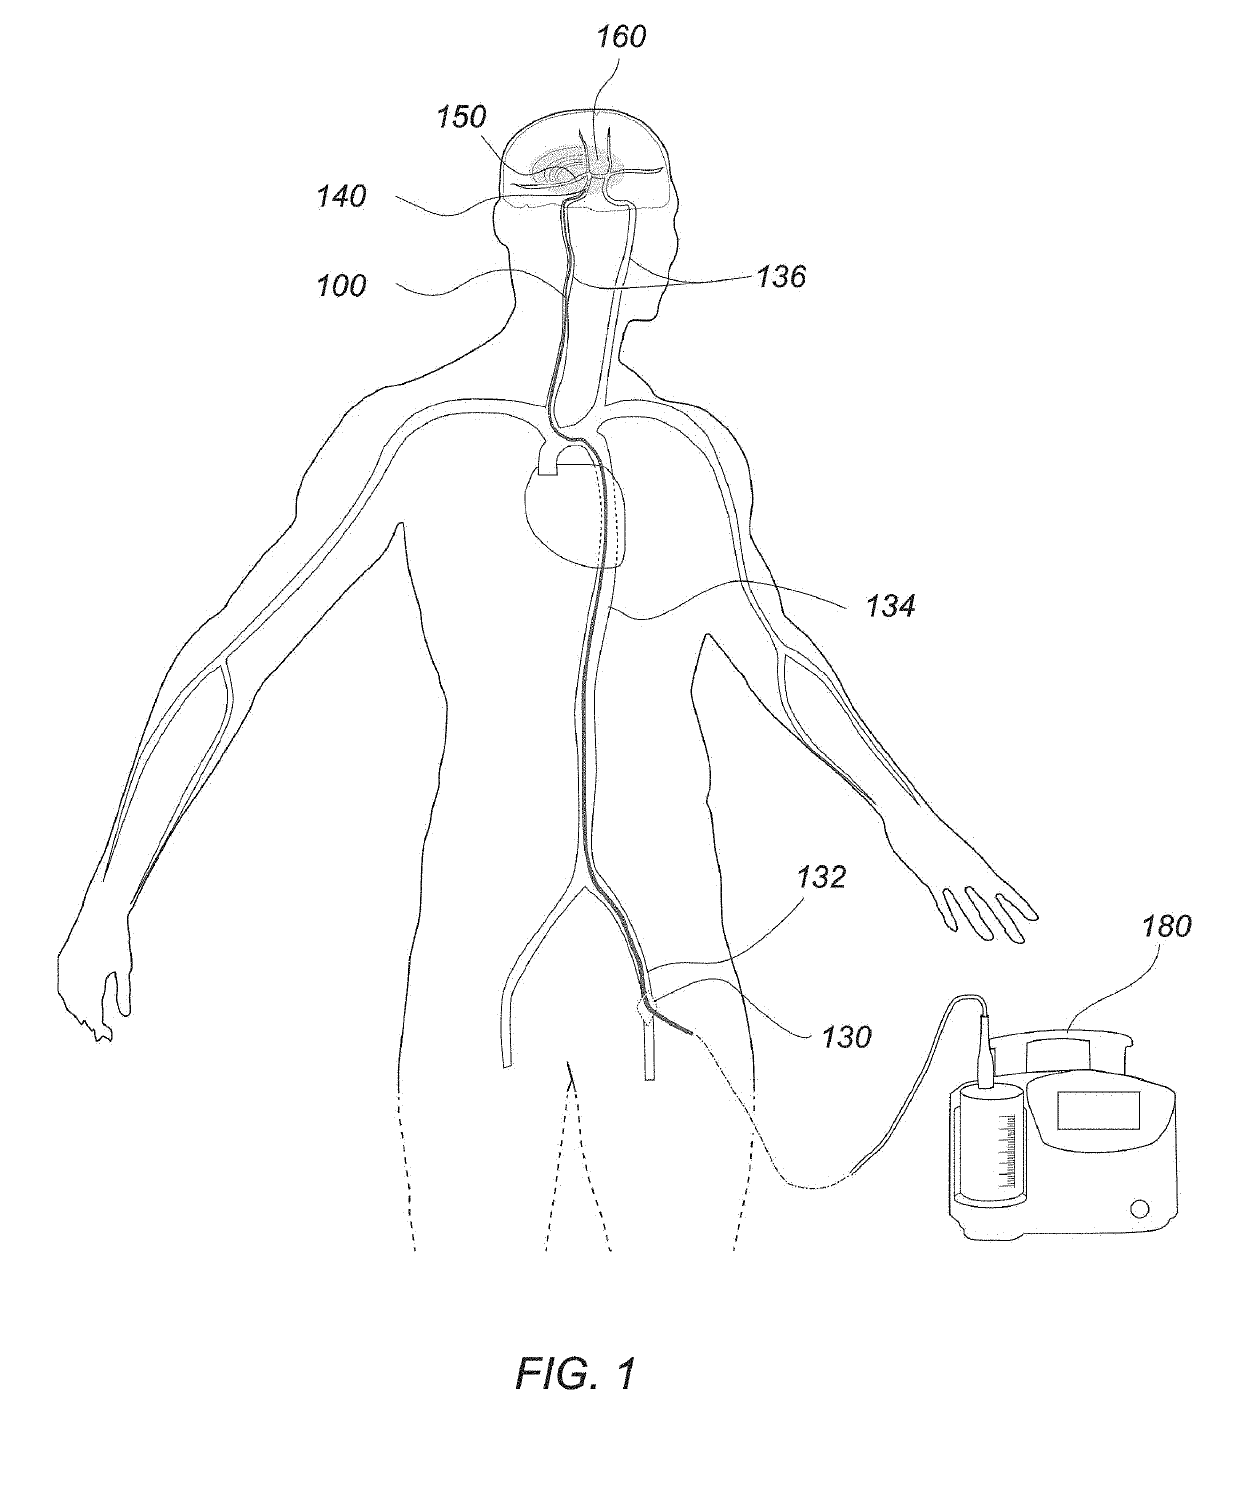 Post-conditioning suction catheter apparatus and methods